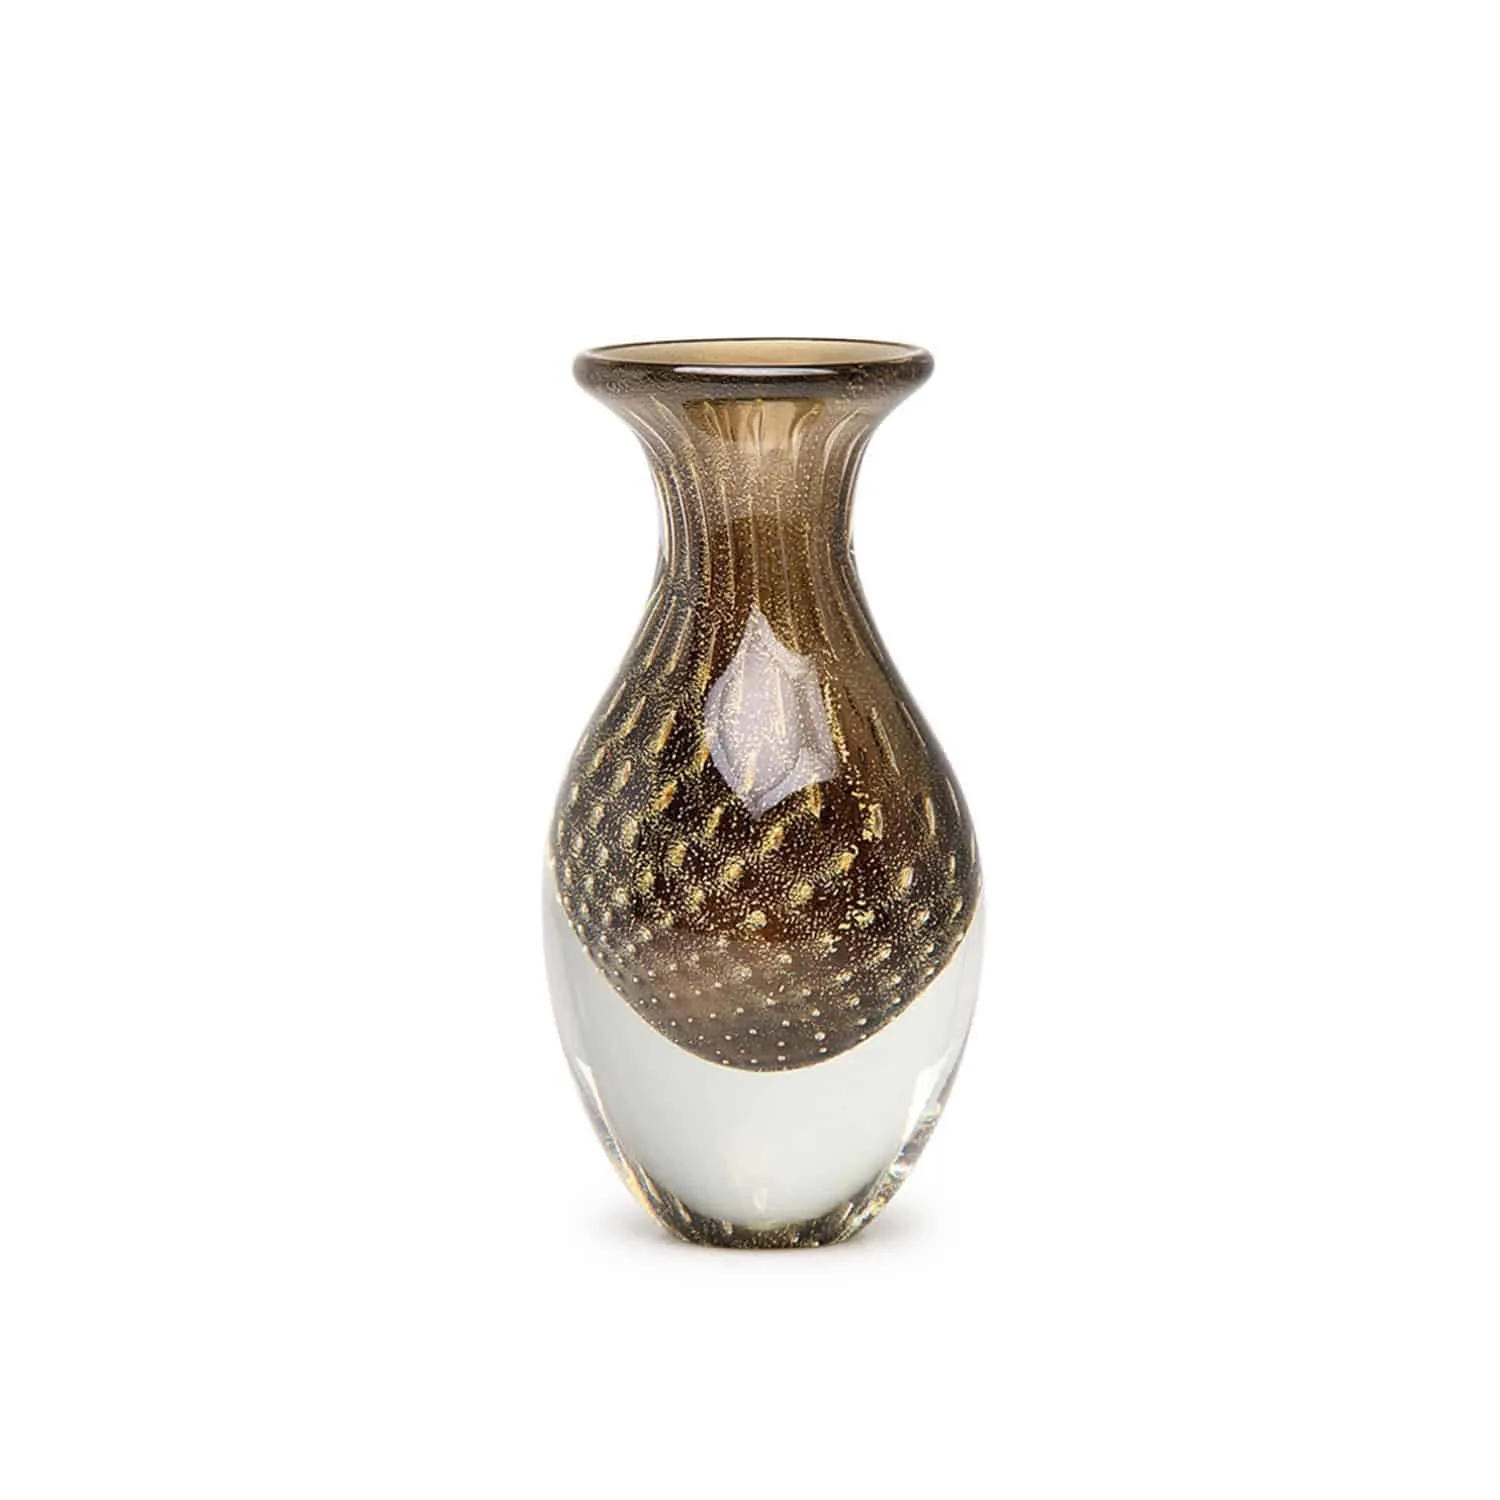 A gorgeous handmade vase, the perfect gift for something different